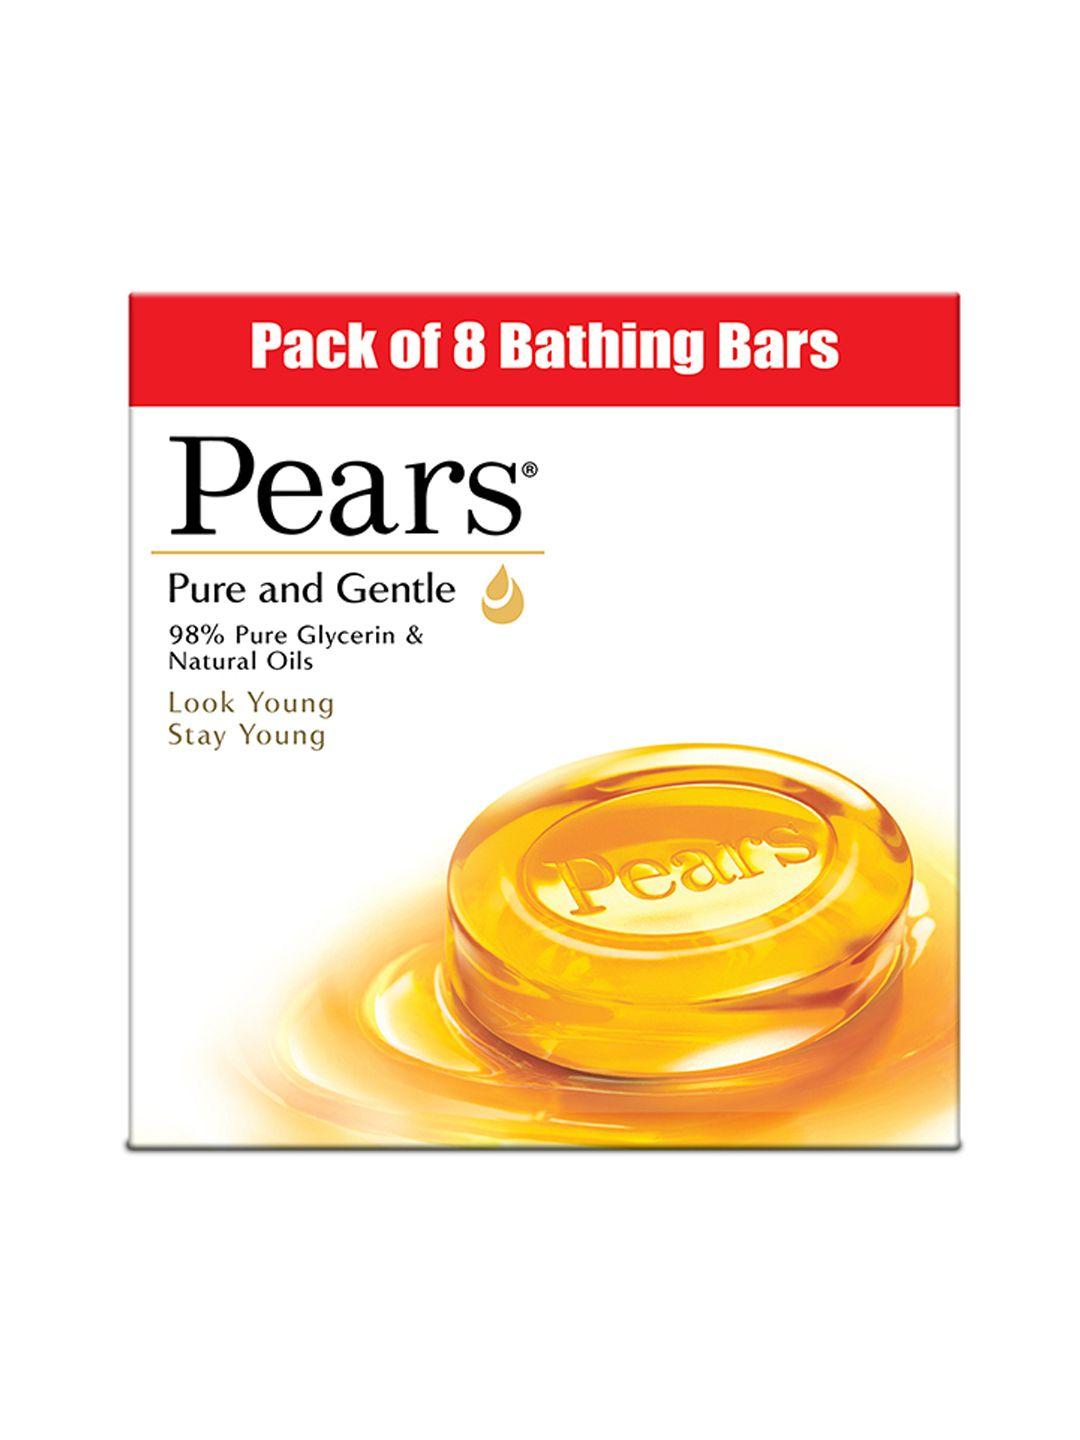 pears set of 8 pure & gentle 98% pure glycerin & natural oils bathing bars 125 g